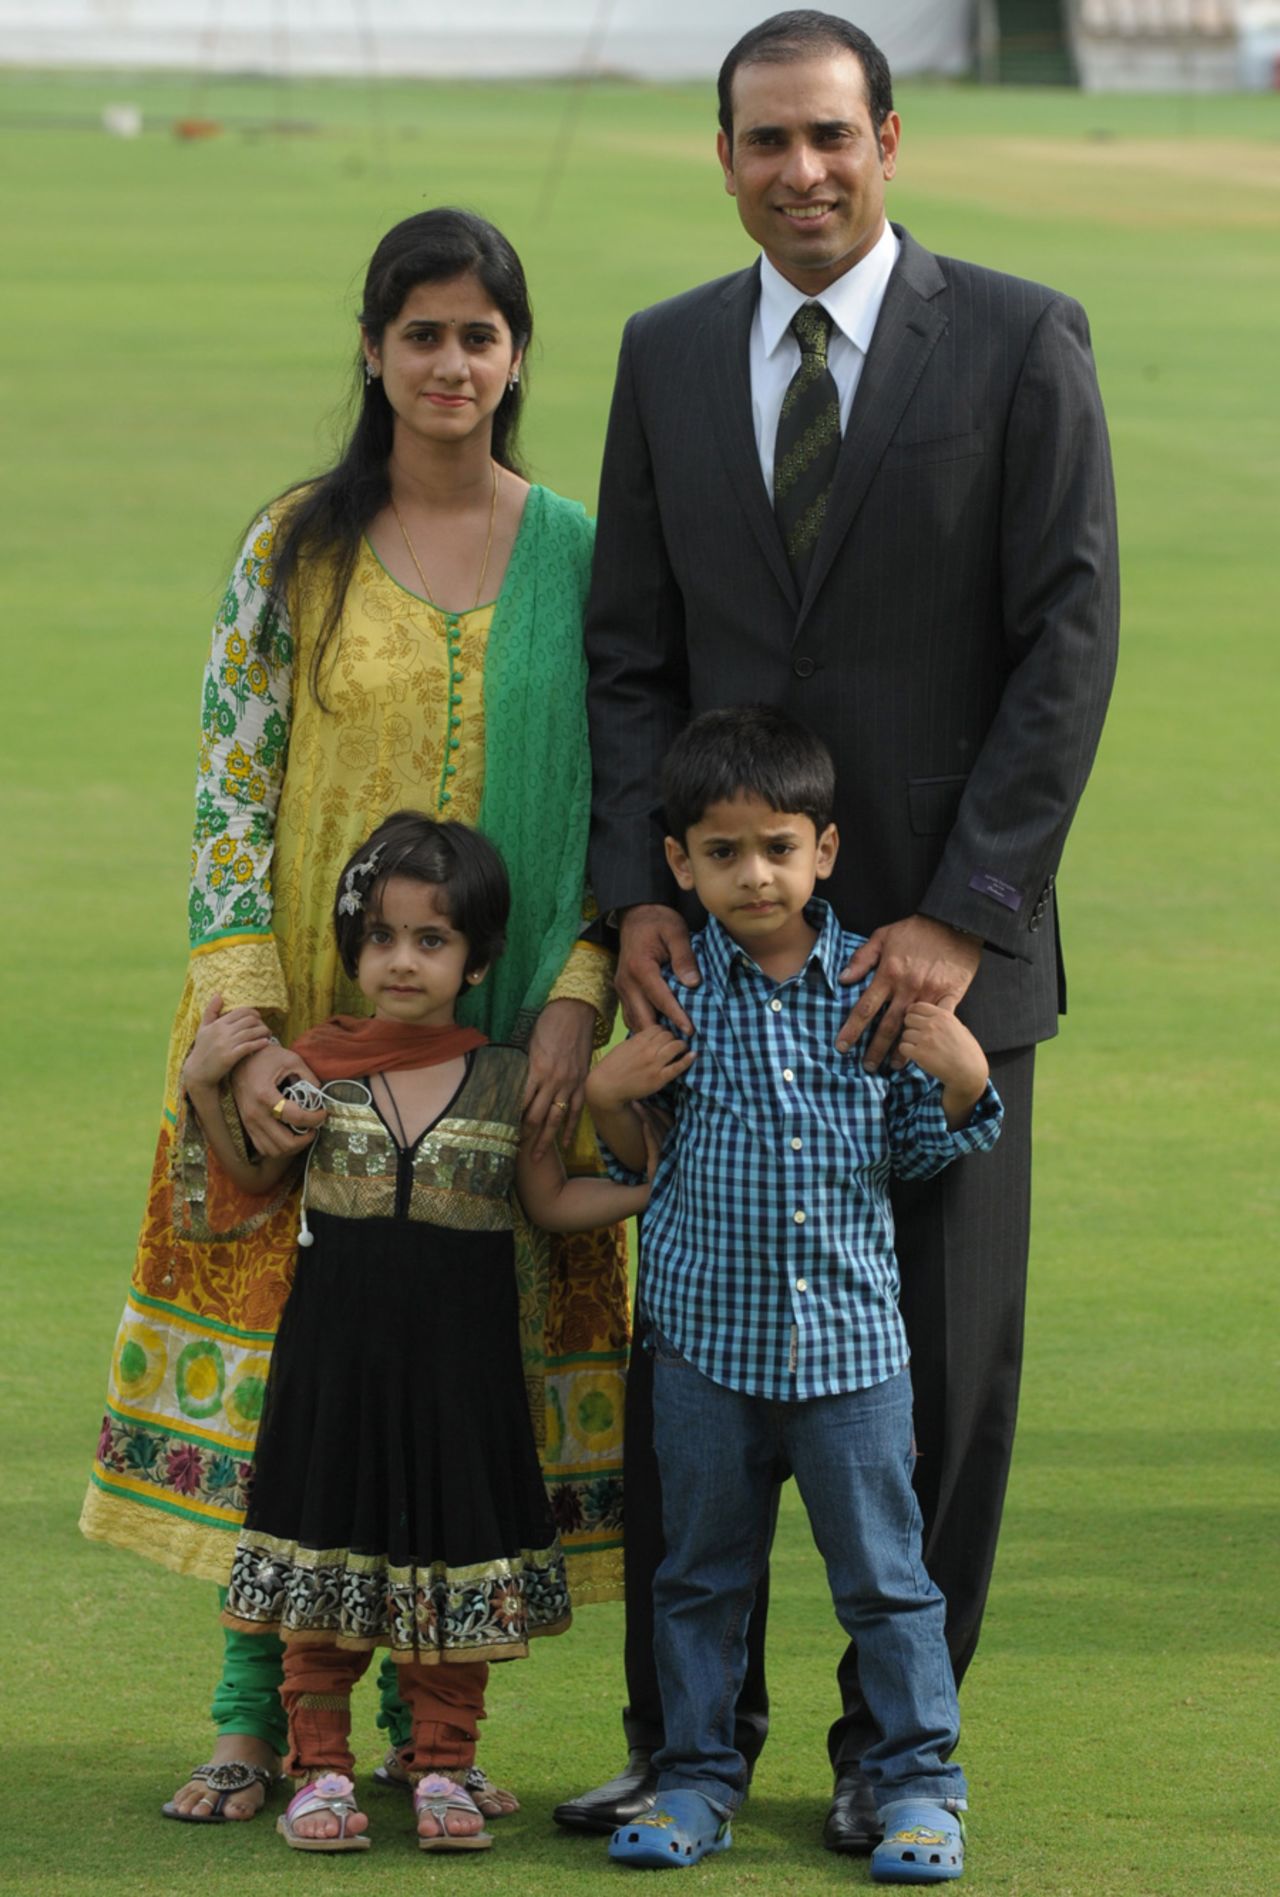 VVS Laxman with his wife and children after announcing his retirement, Hyderabad, August 18, 2012